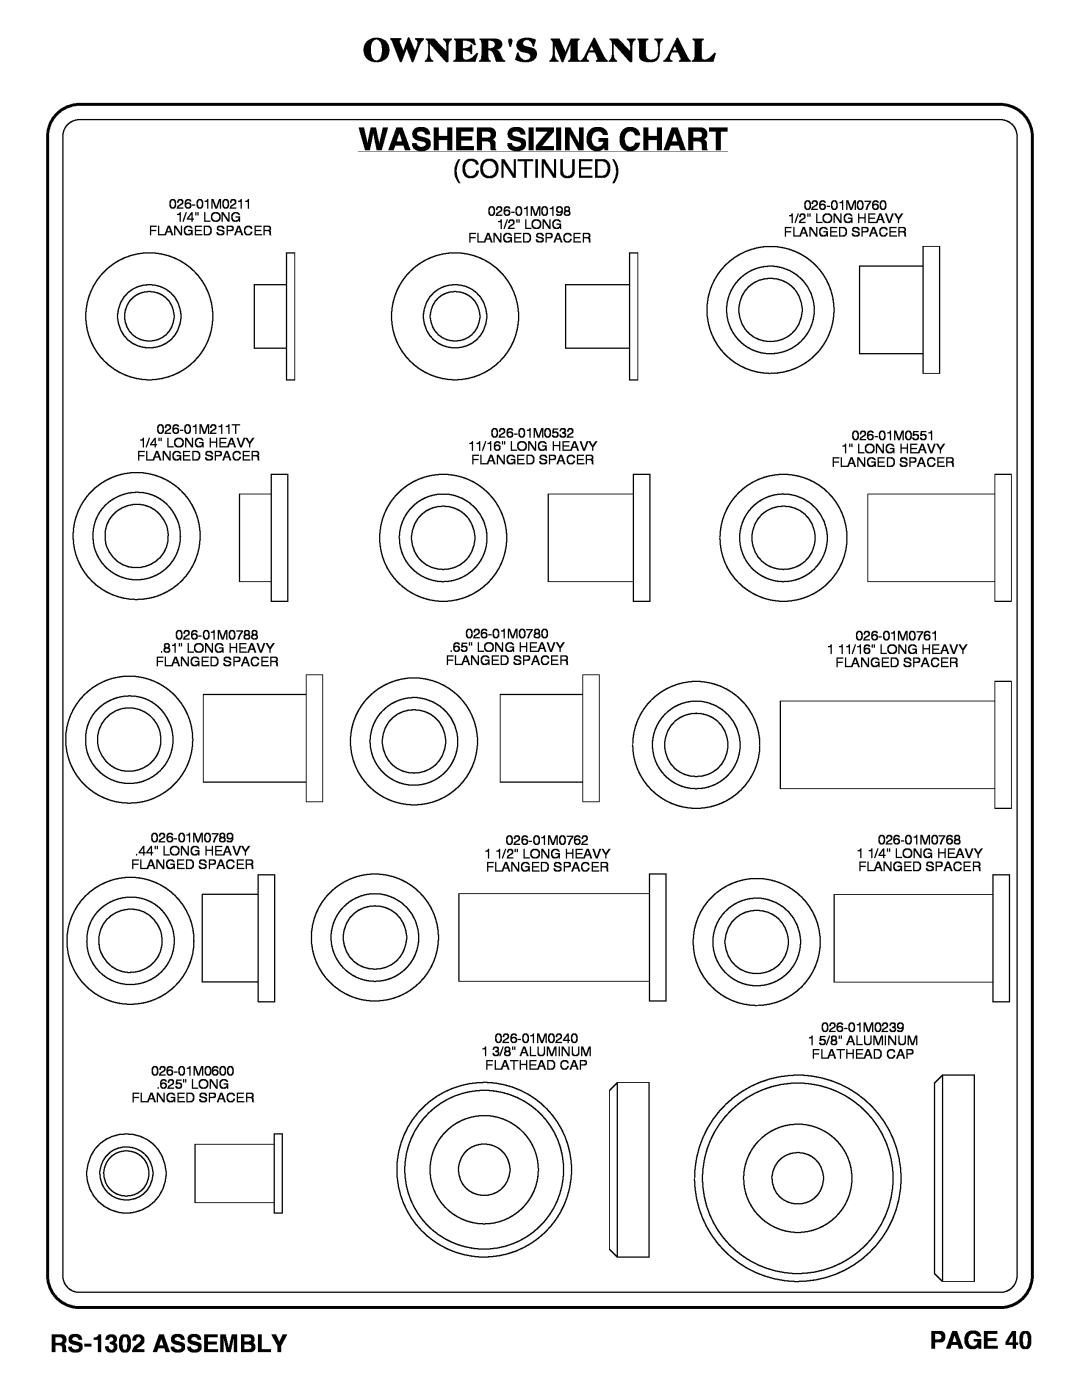 Hoist Fitness RS-1302 owner manual Owners Manual Washer Sizing Chart, Page, 026-01M0211 1/4 LONG FLANGED SPACER 